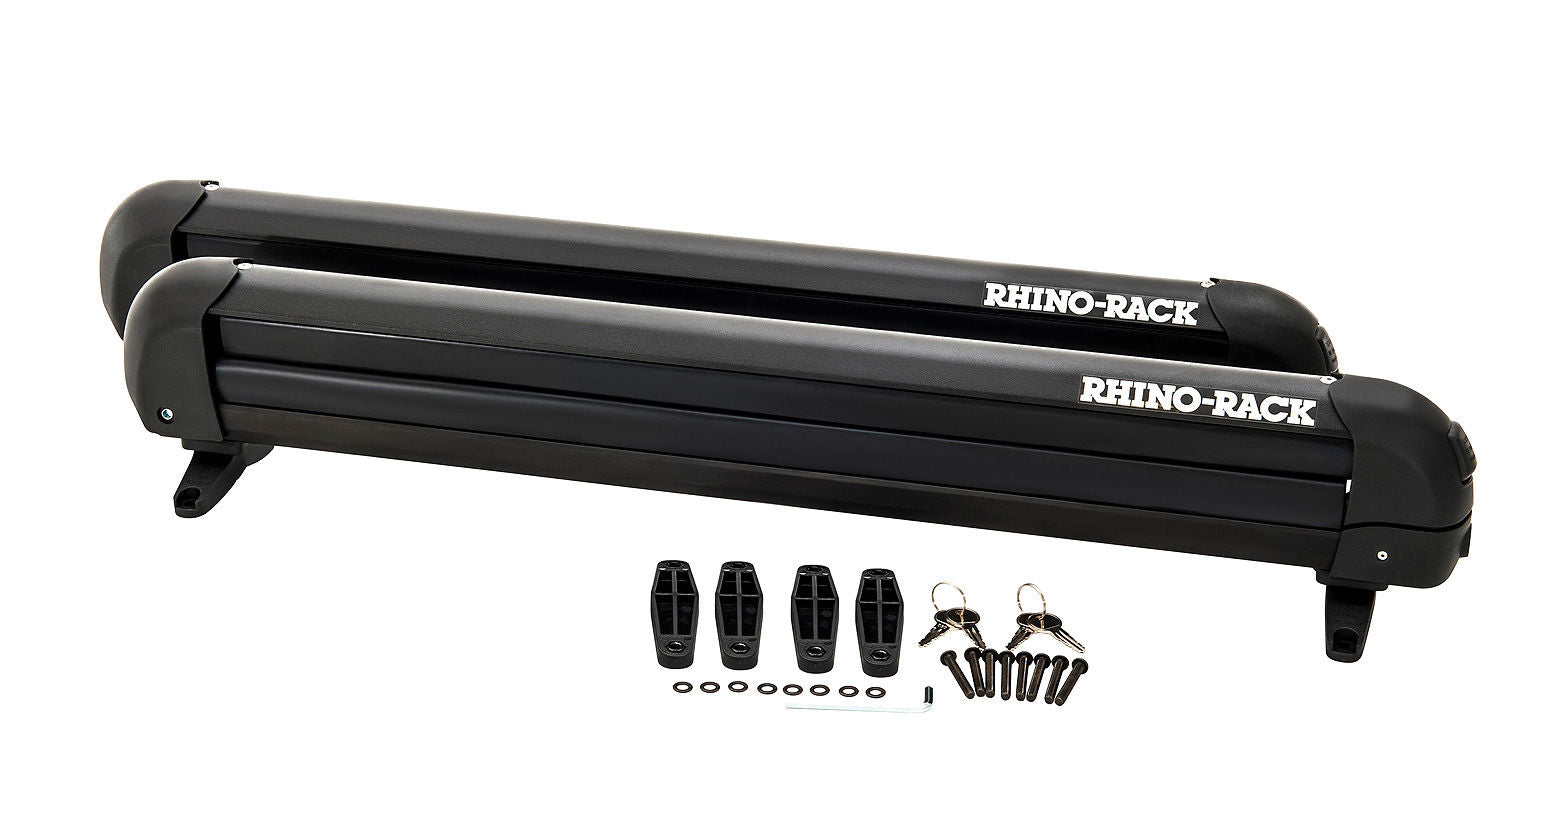 Rhino Rack 576 Ski and Snowboard Carrier - 6 Skis or 4 Snowboards